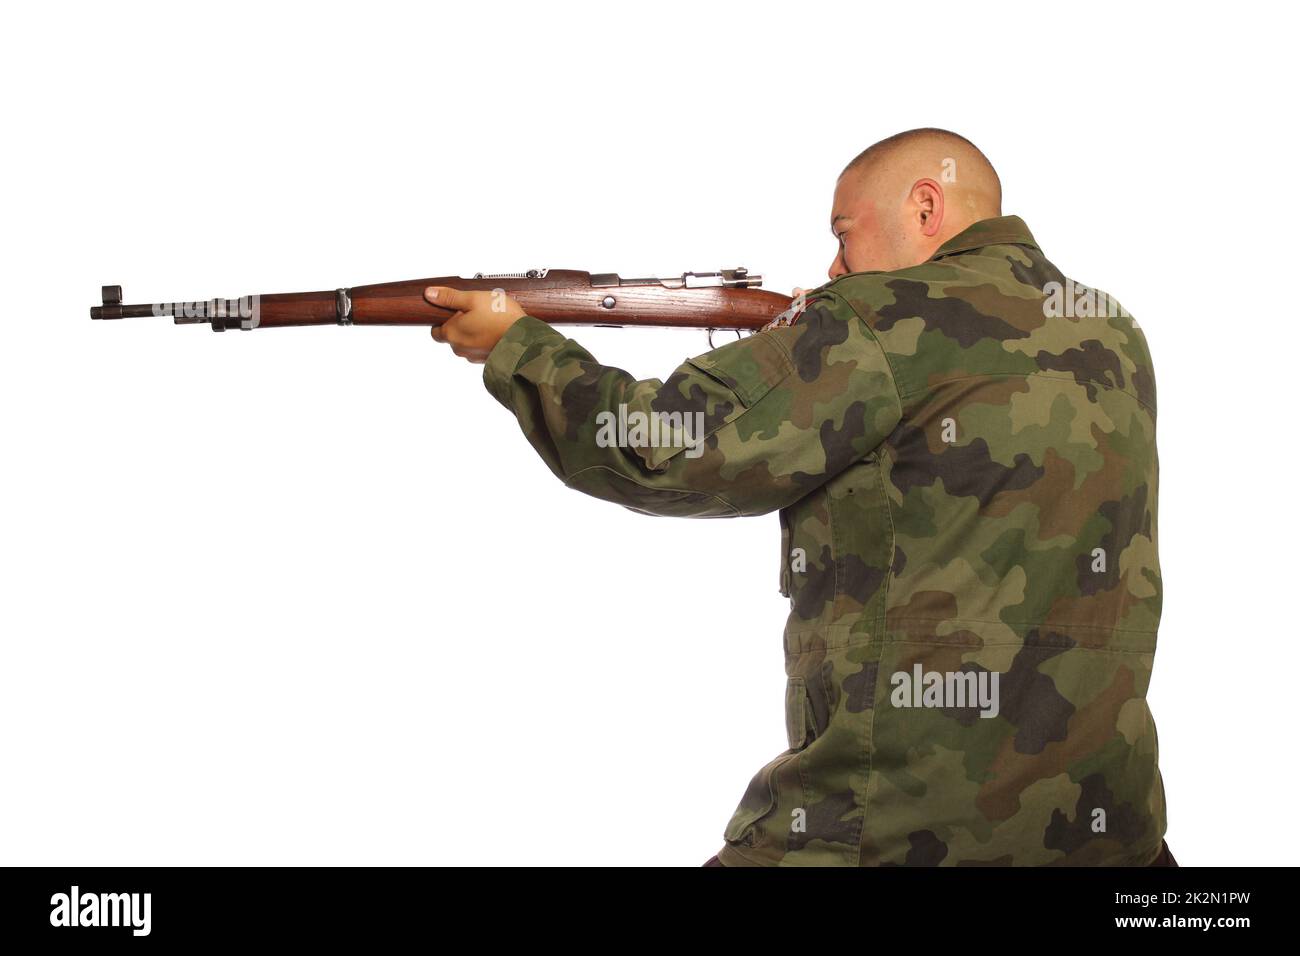 Man Wearing Camouflage Holding a Gun Isolated on White Background Stock Photo